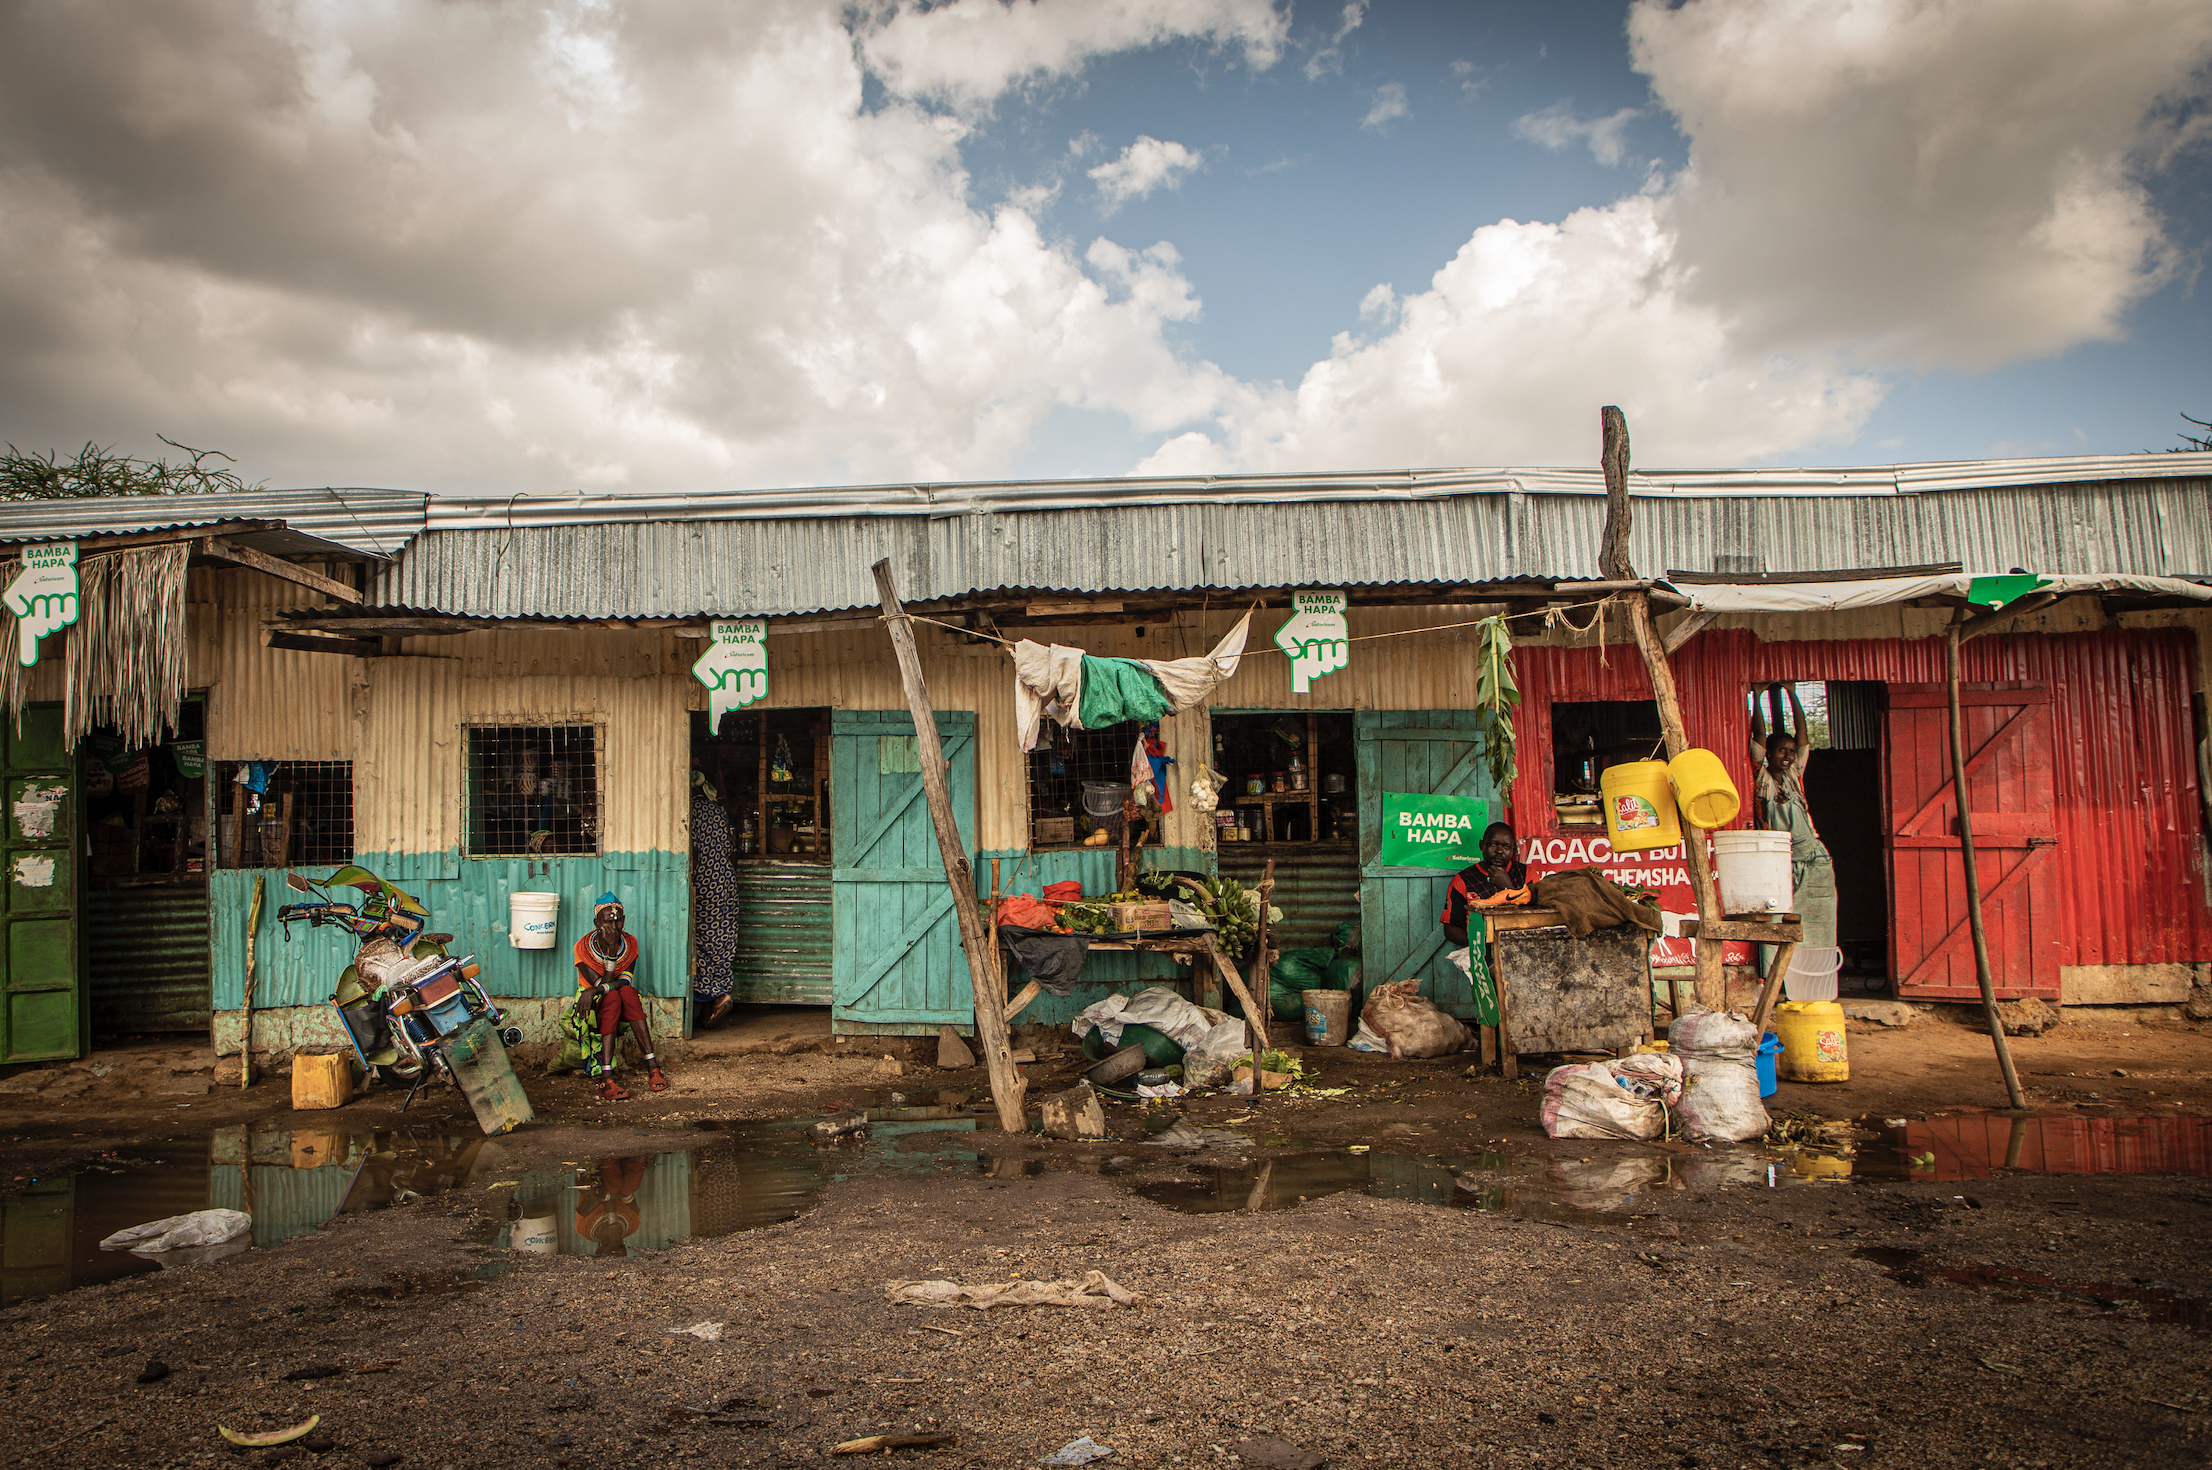 Traders and locals sit outside their stores in the Rendille town of Merille in Kenya. Image by Will Swanson. Kenya, 2020.